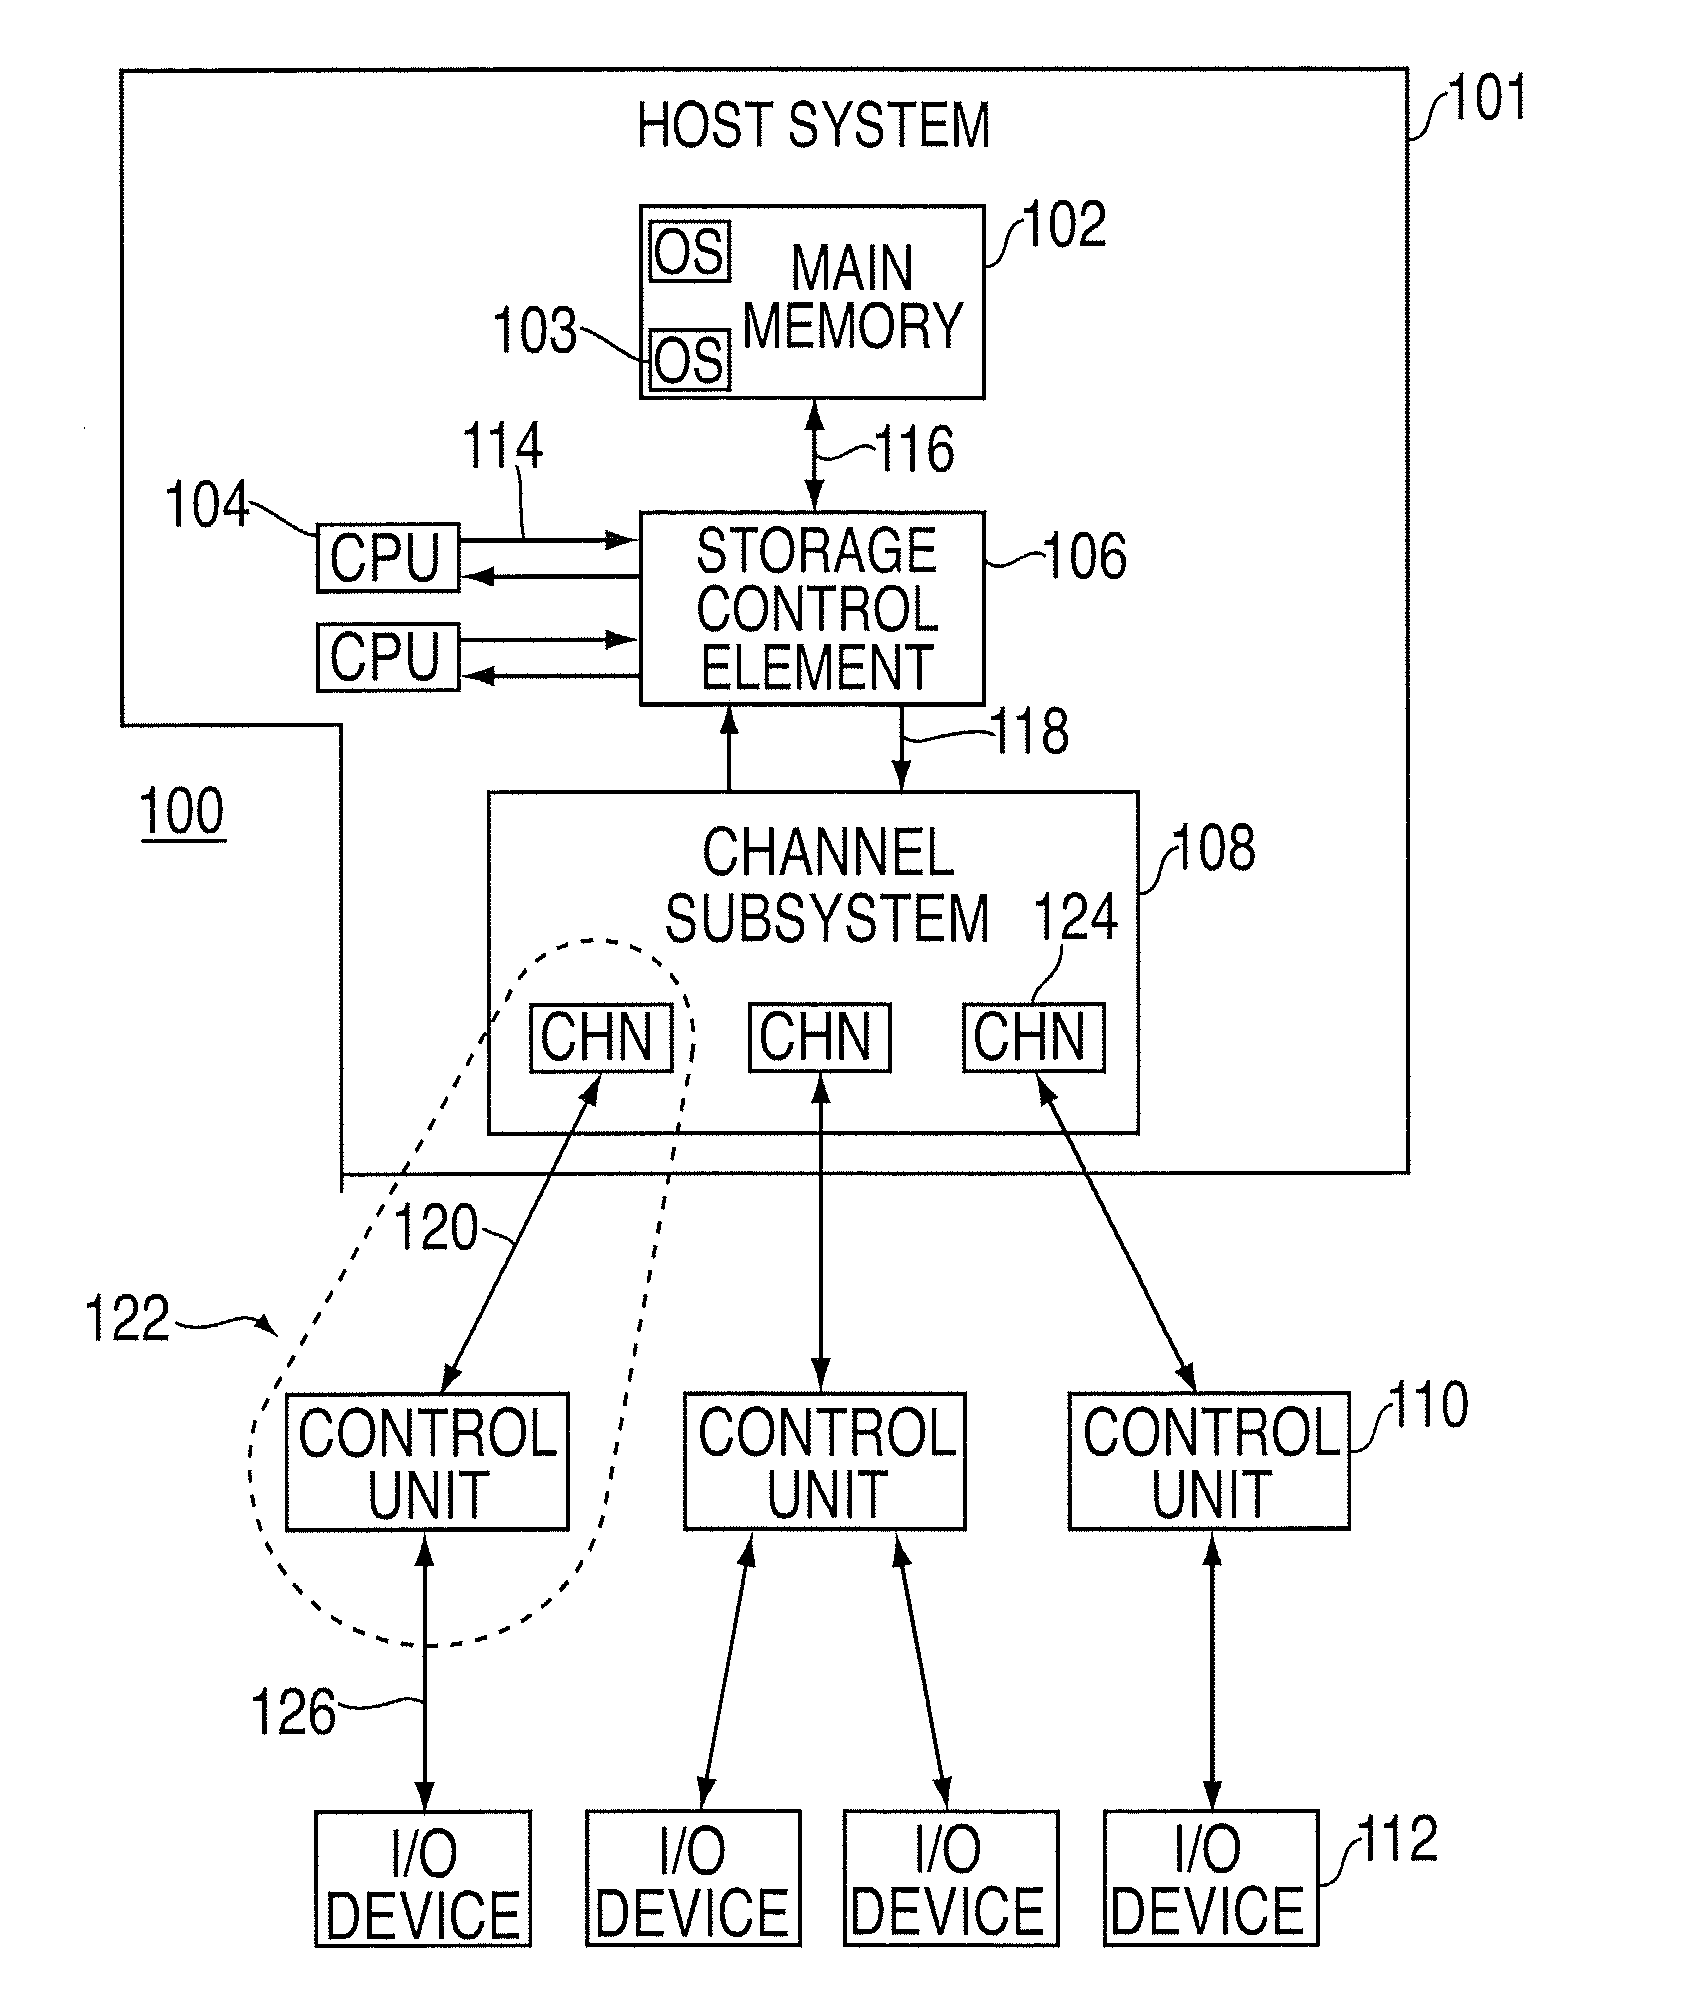 Providing indirect data addressing for a control block at a channel subsystem of an I/O processing system